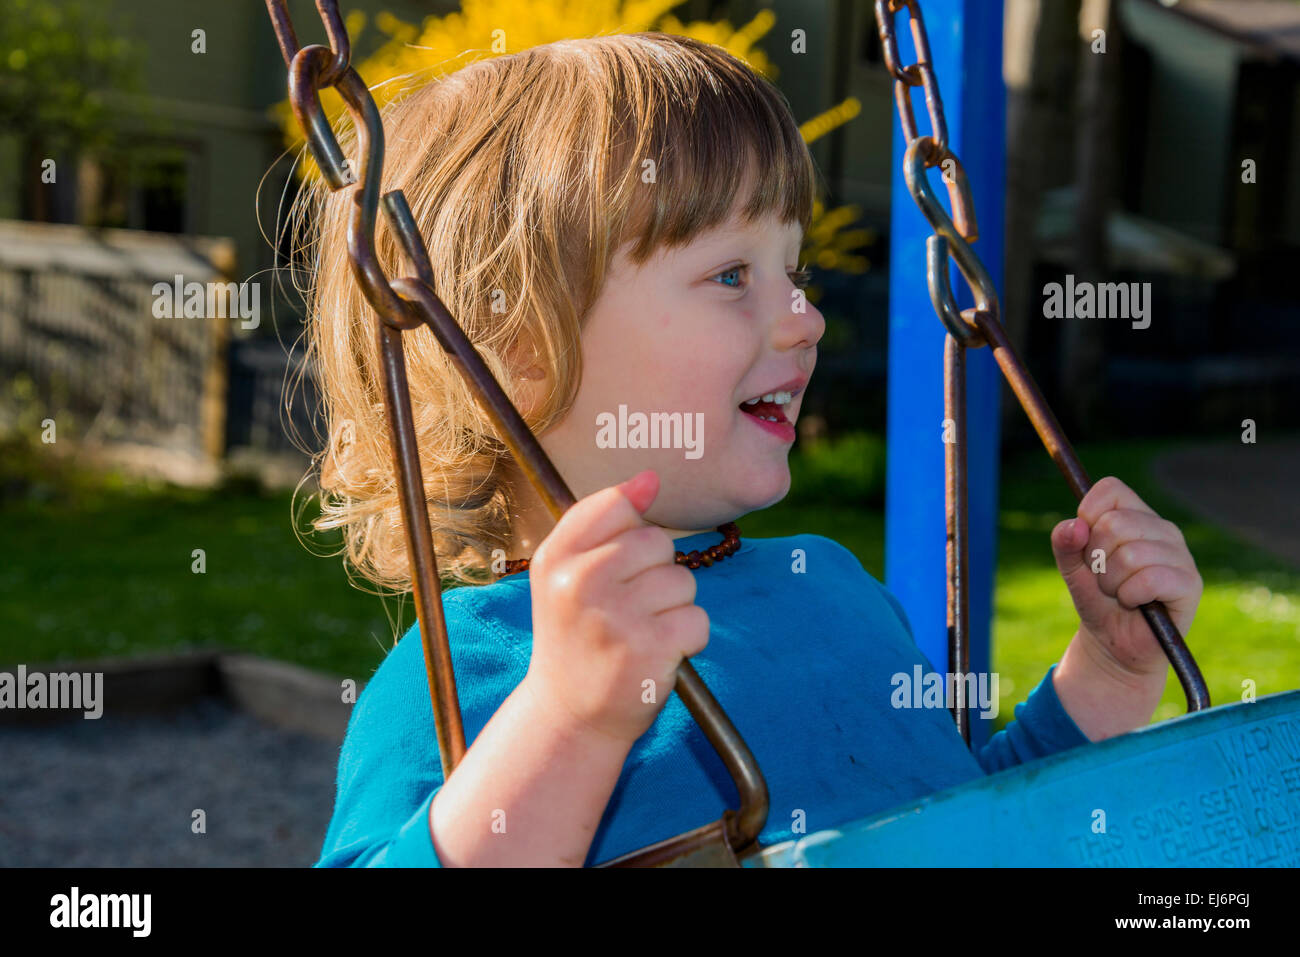 Happy boy on playground swing. Banque D'Images